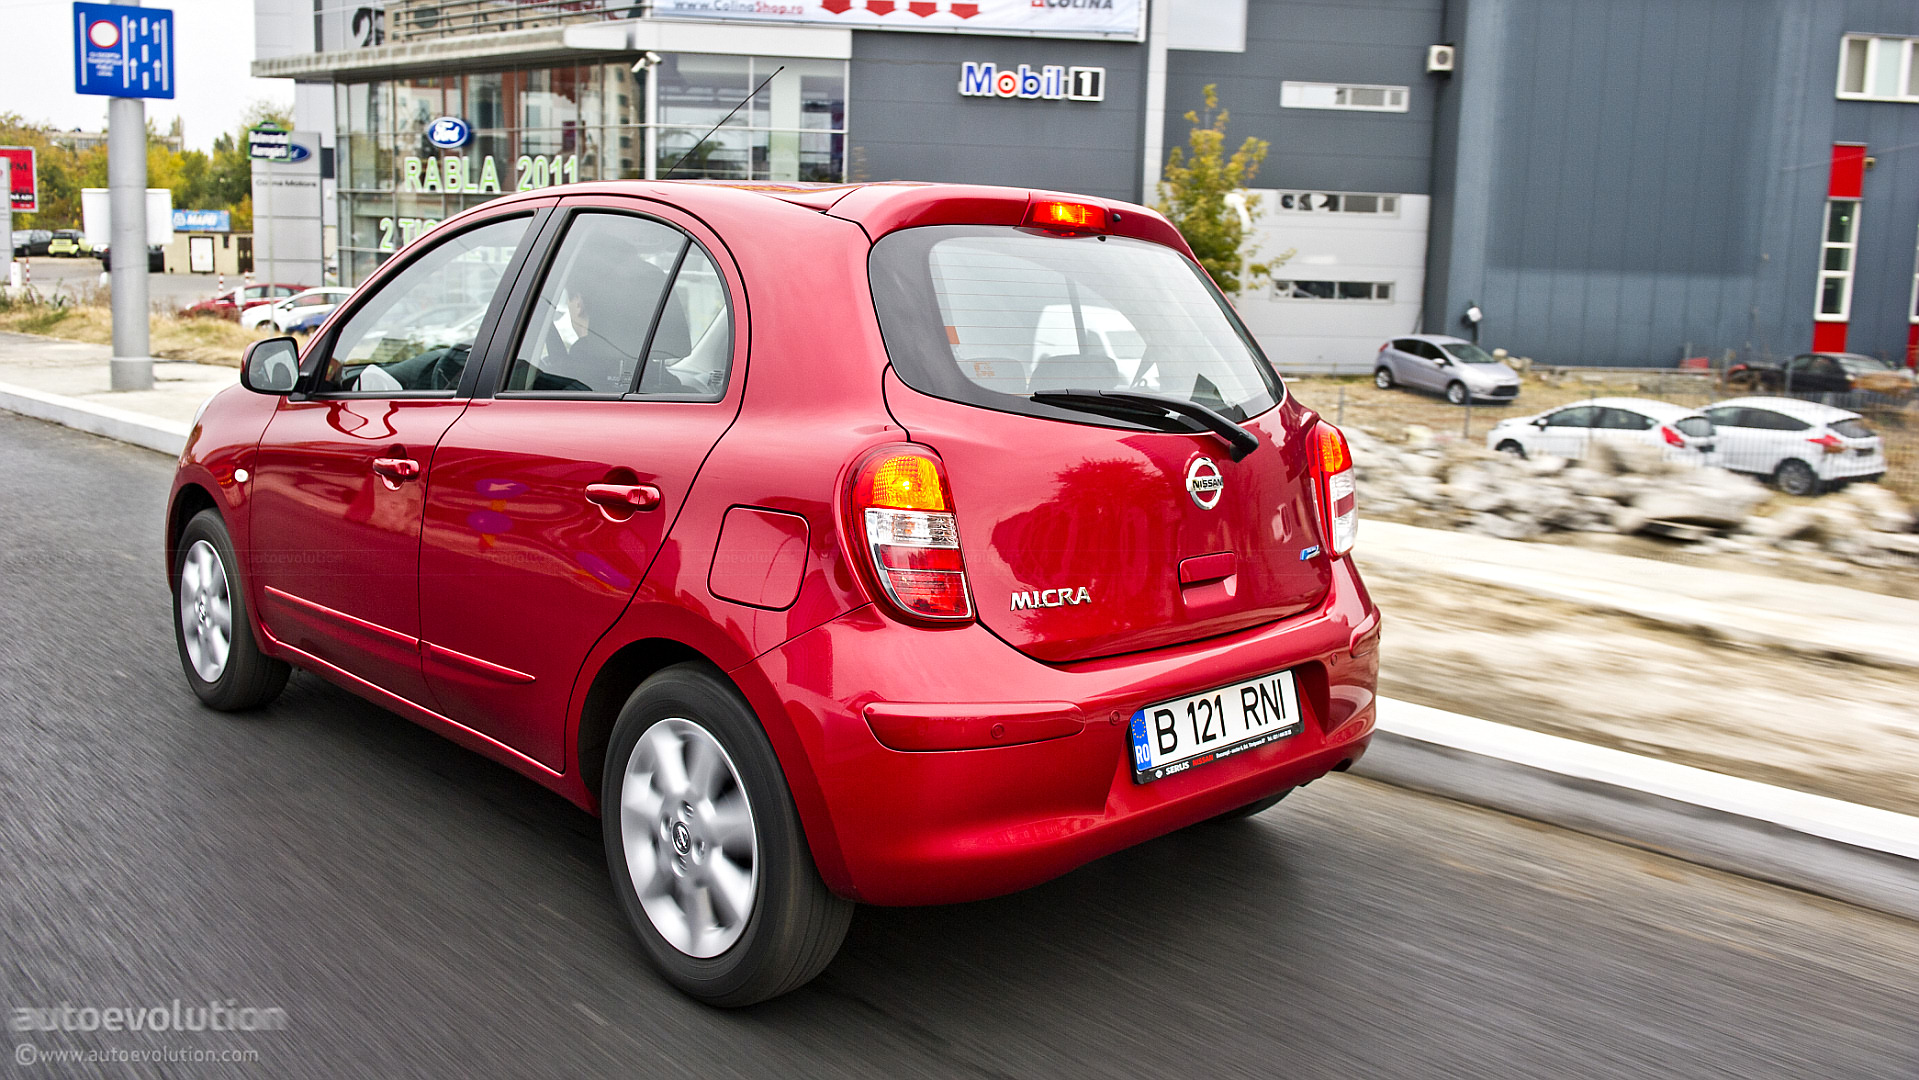 2011 Nissan micra safety rating